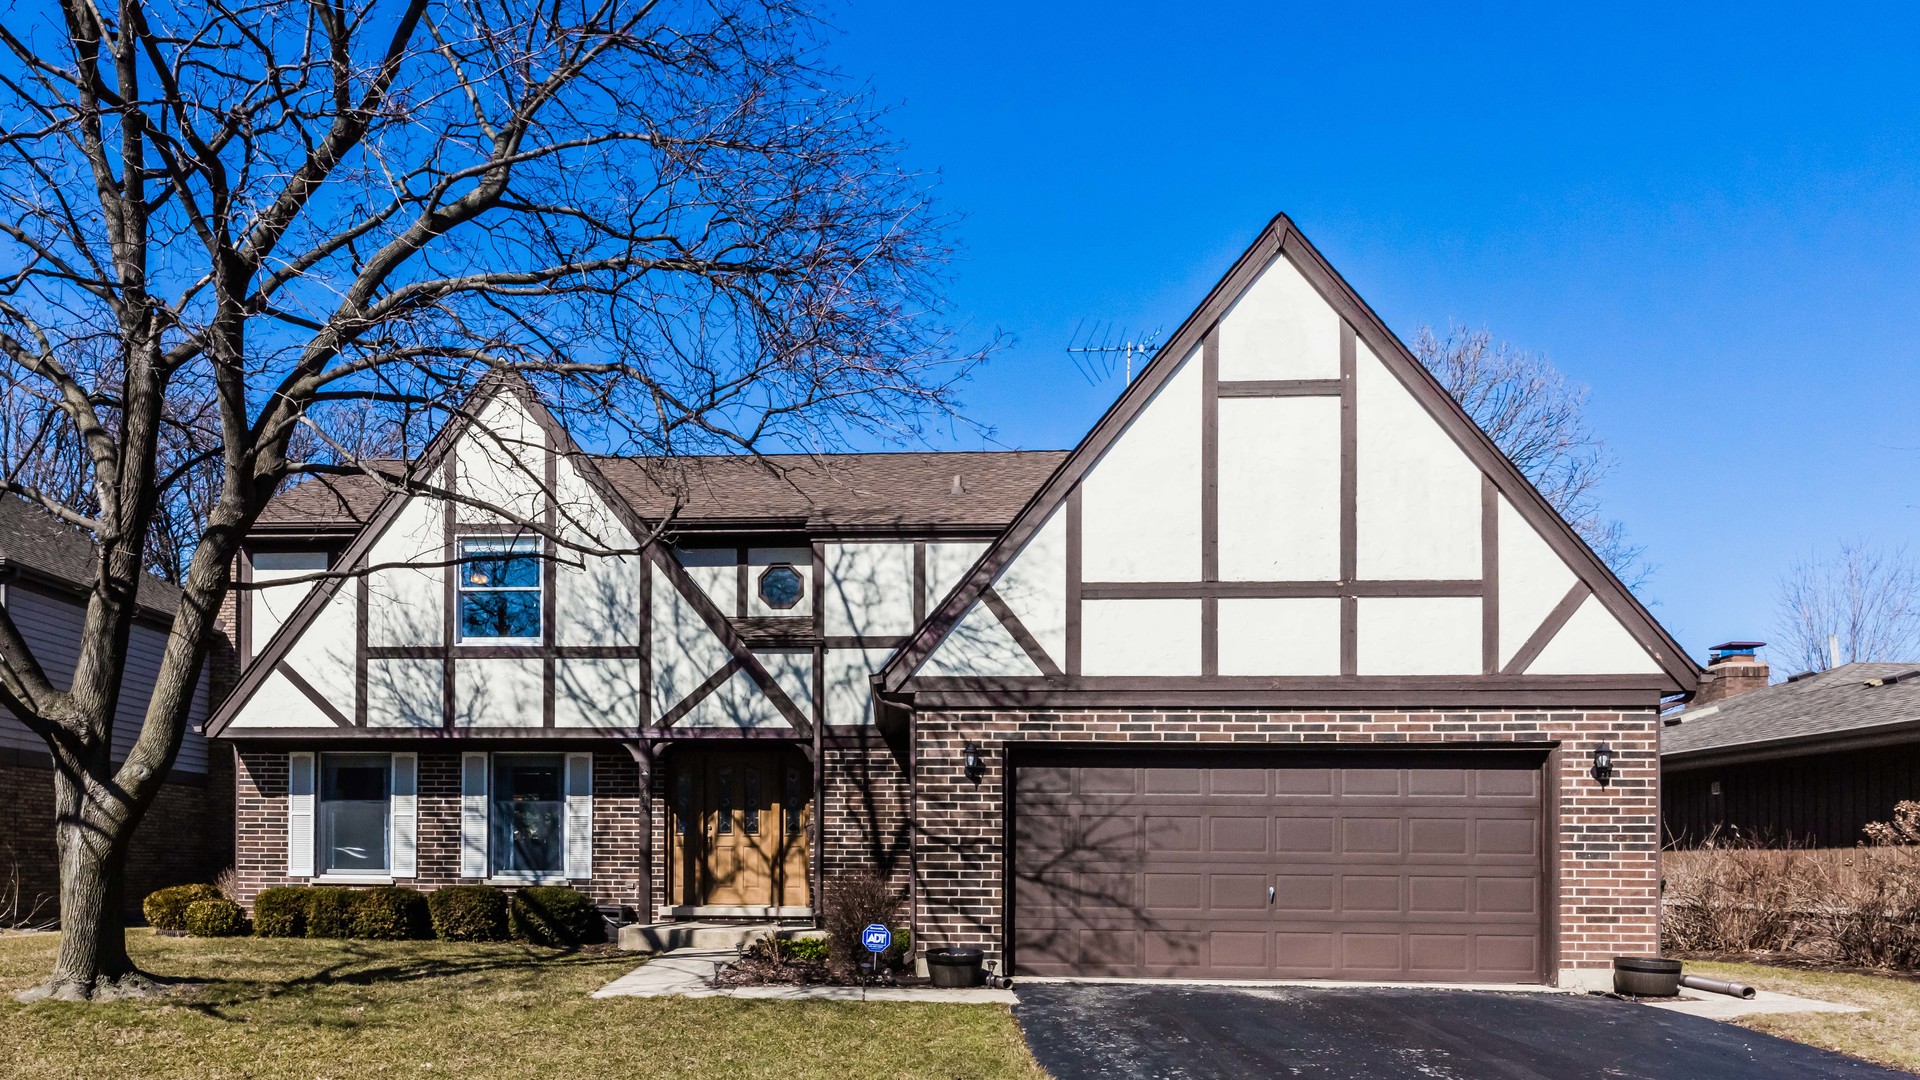 Just reduced! Open House, 3008 Edgemont, Park Ridge, 60068 Sunday April 22, 2018 from 1-3